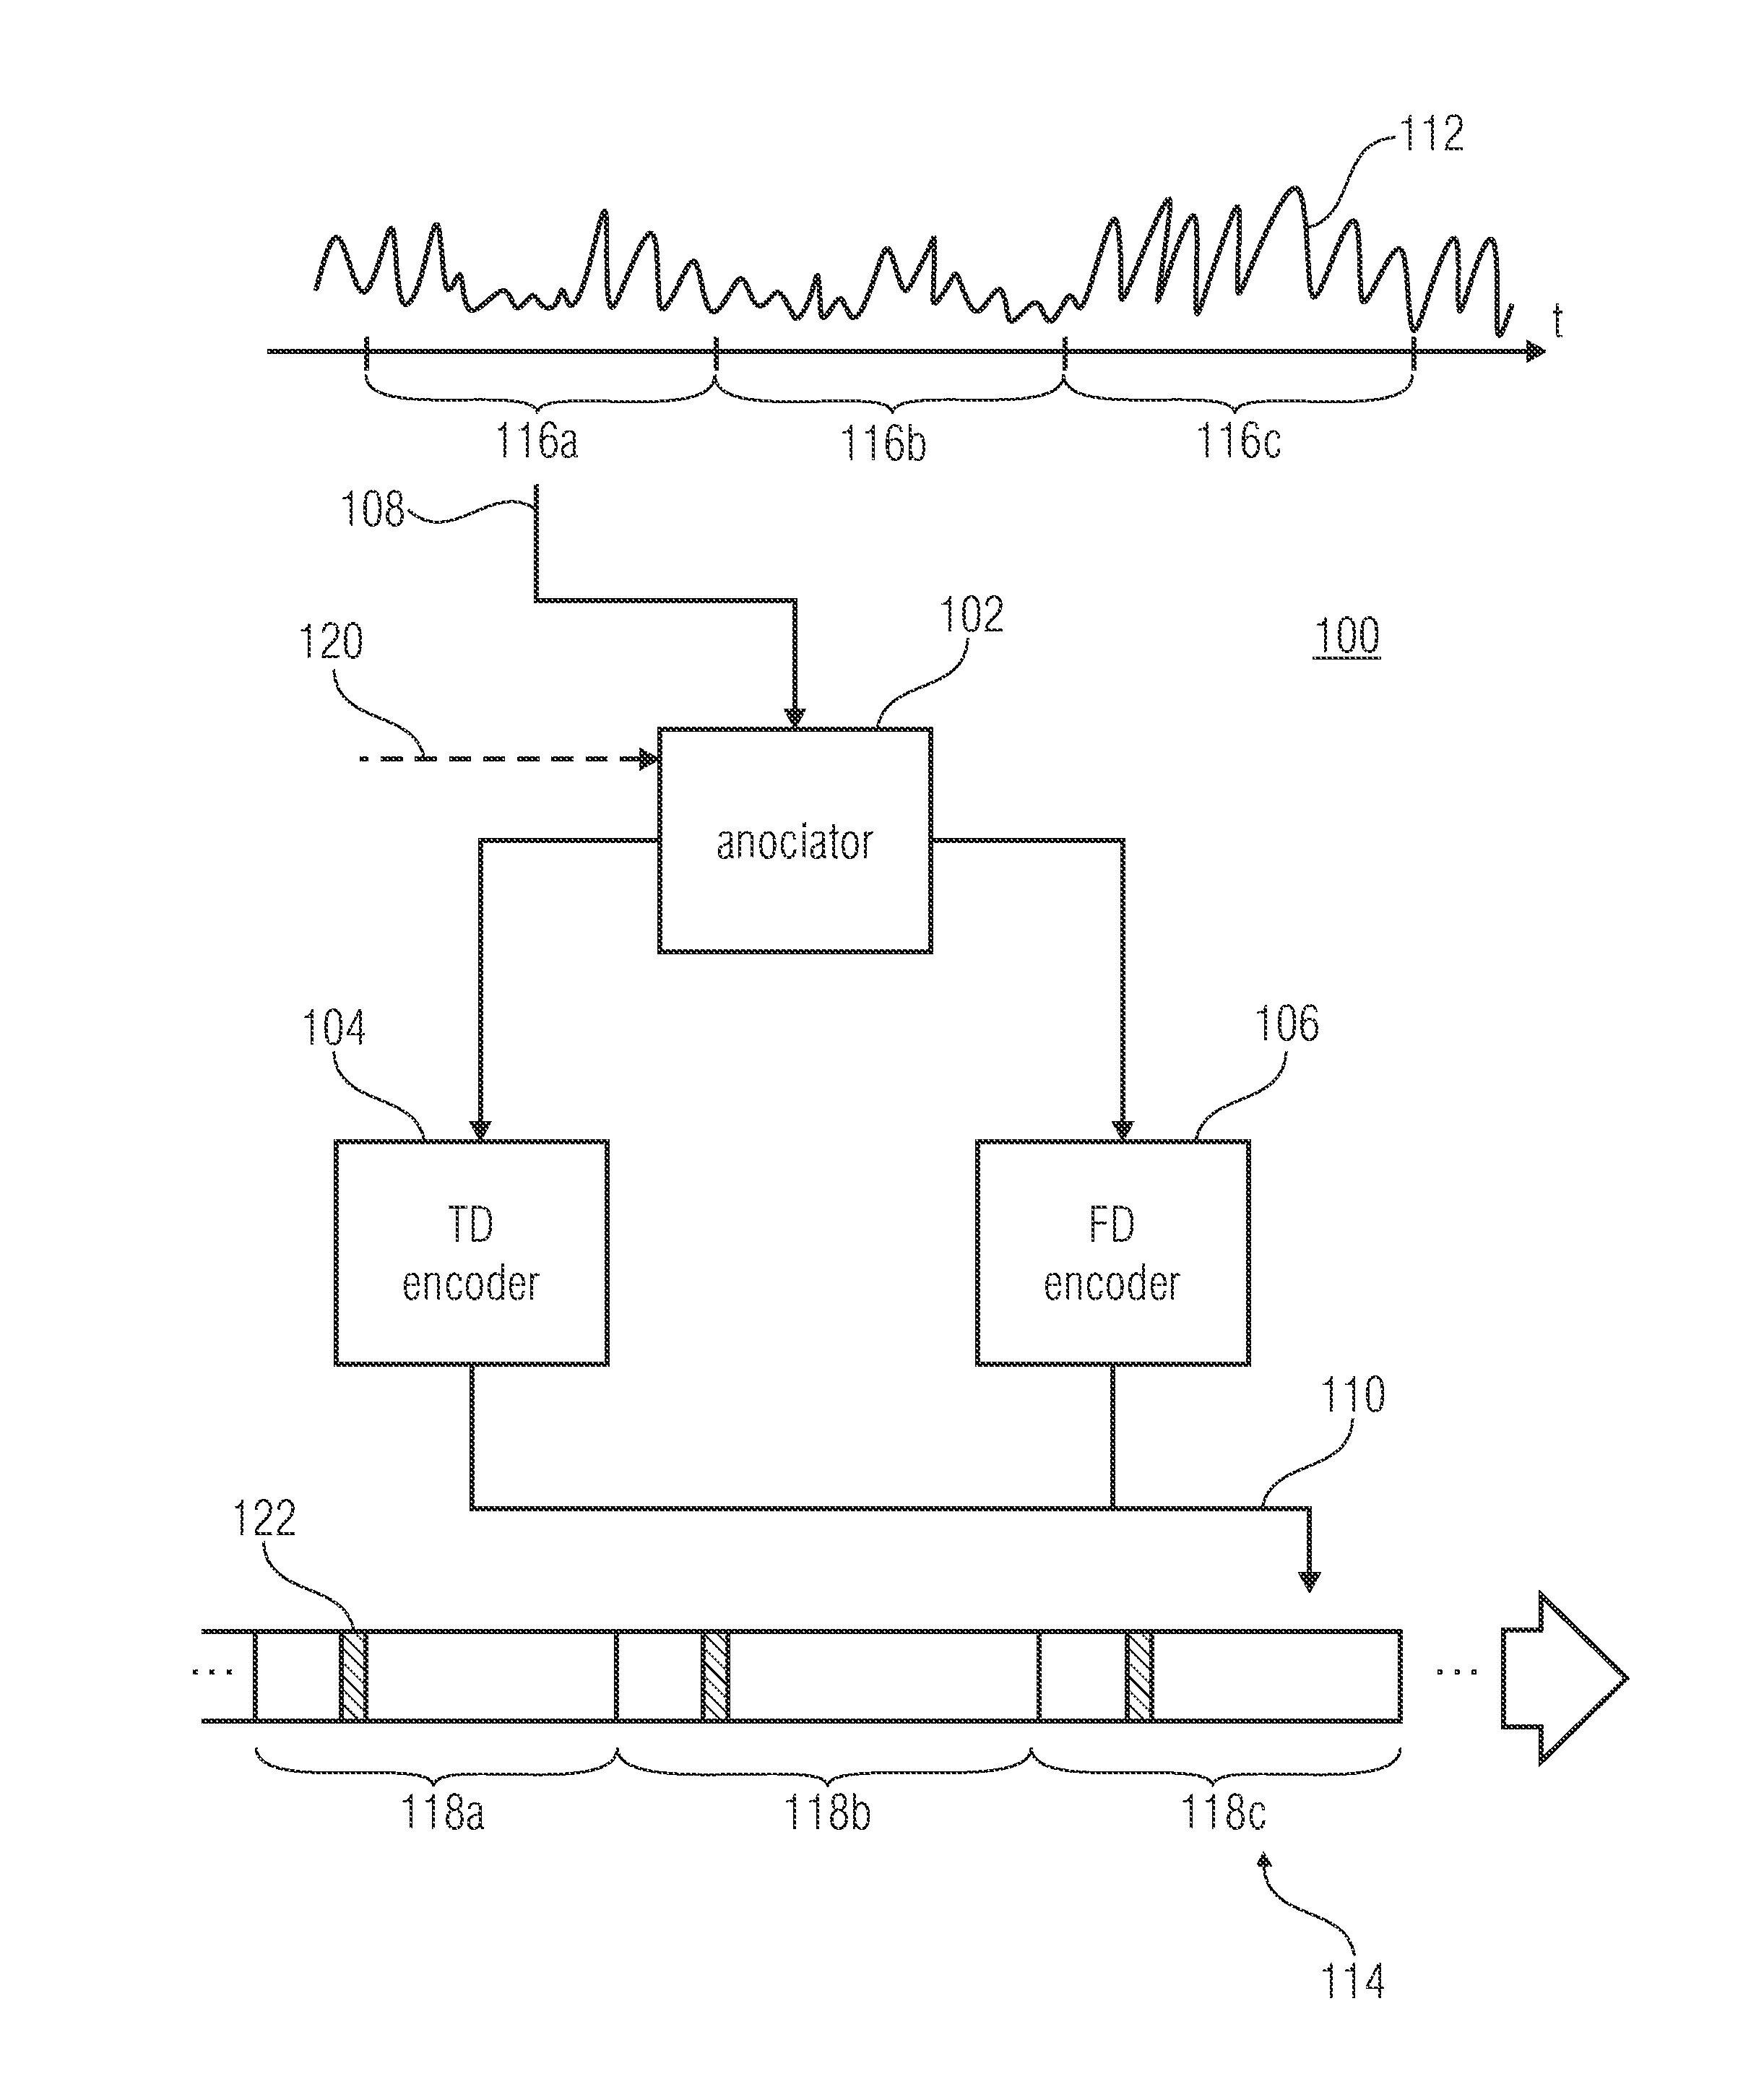 Audio codec supporting time-domain and frequency-domain coding modes